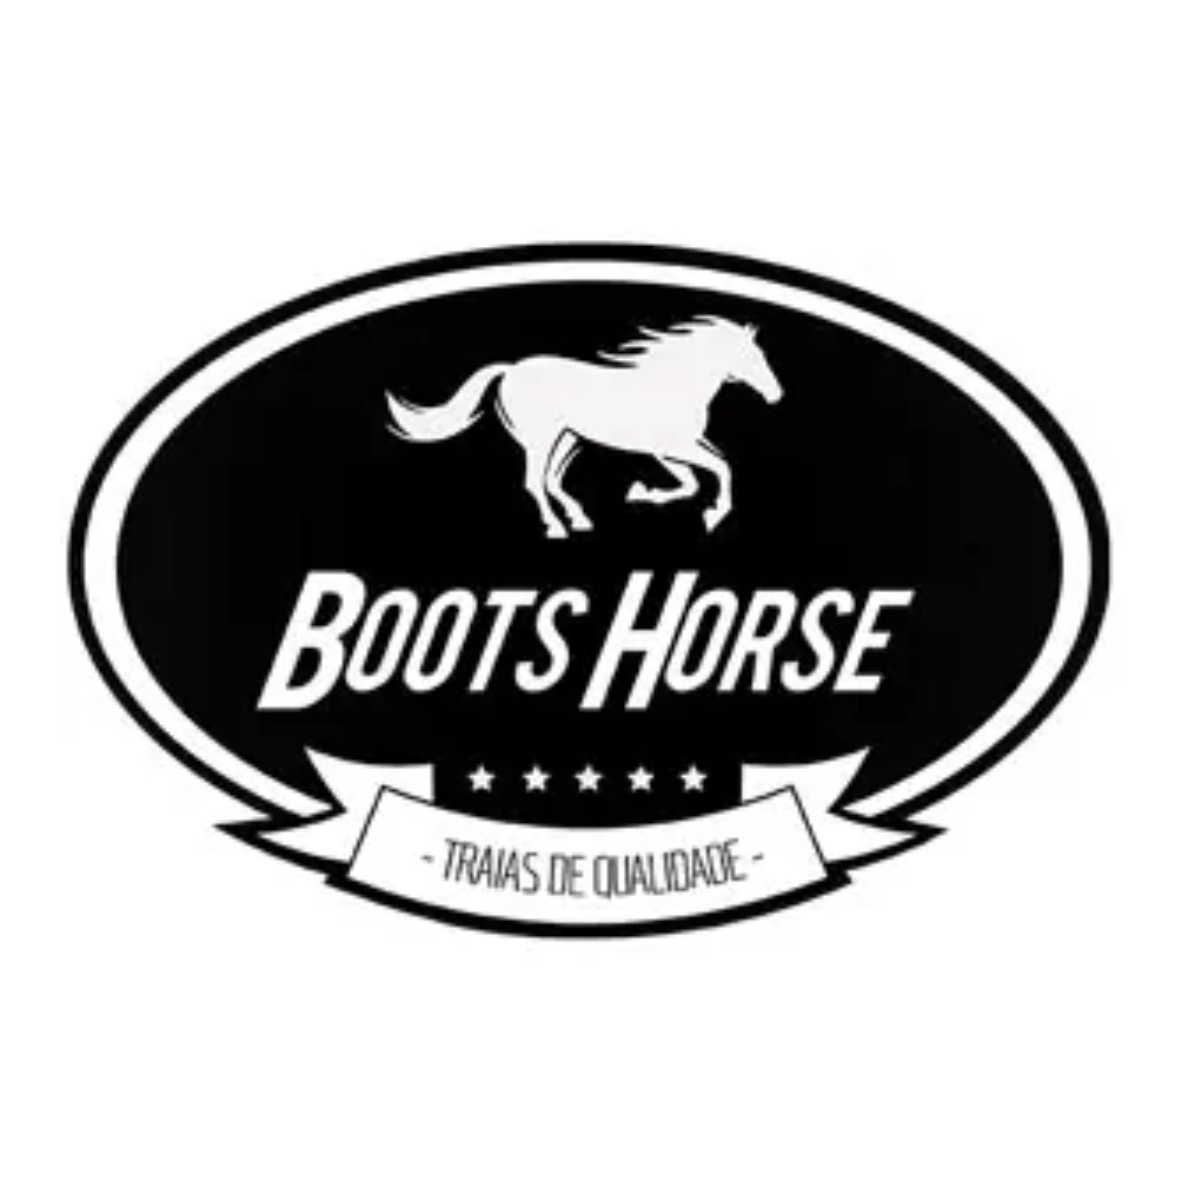 Boots Horse